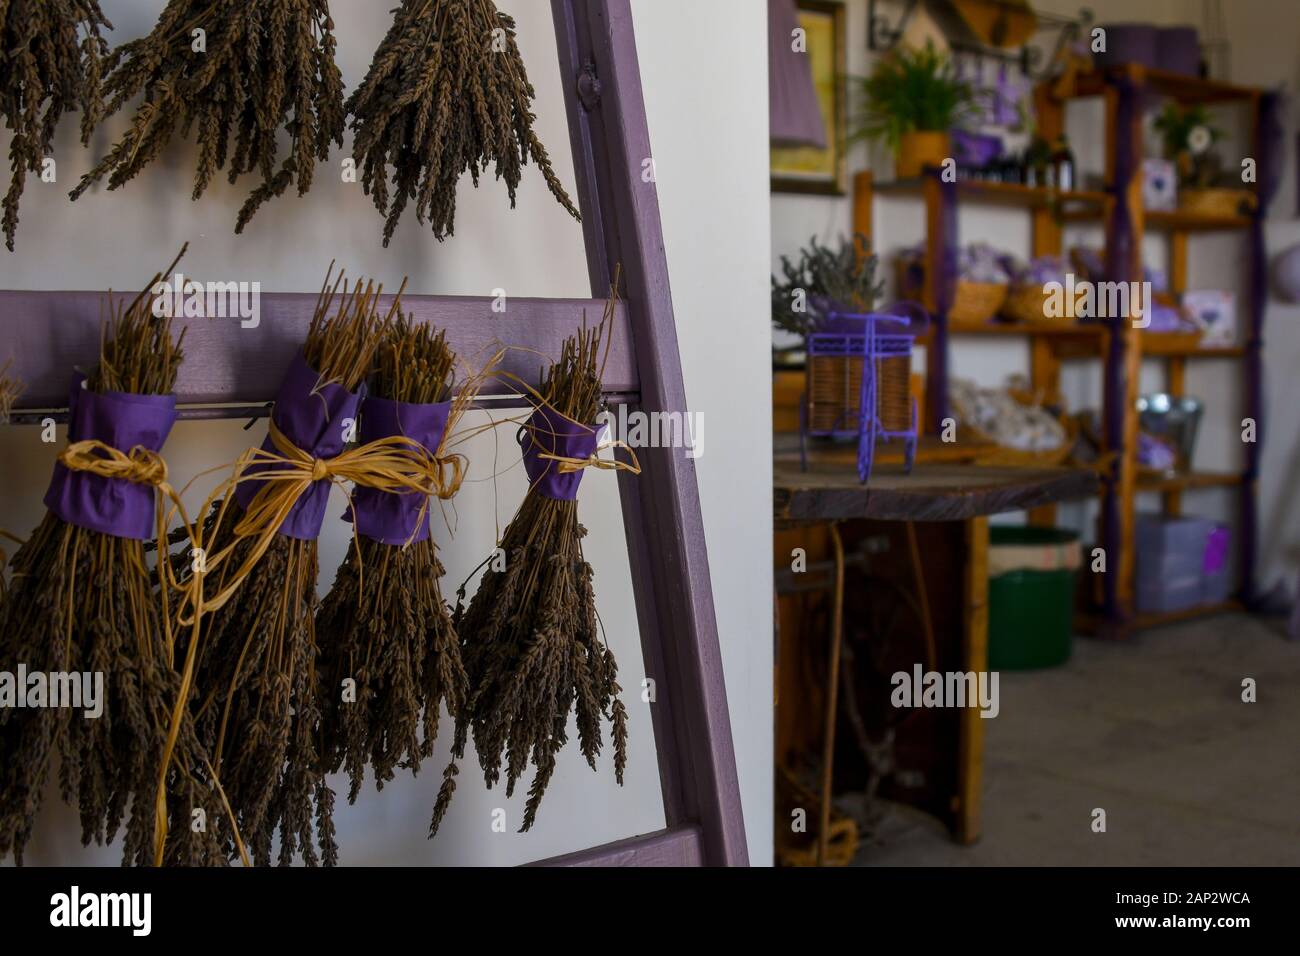 Aromatherapy bouquet of lavender plants drying to be used as potpourri Stock Photo